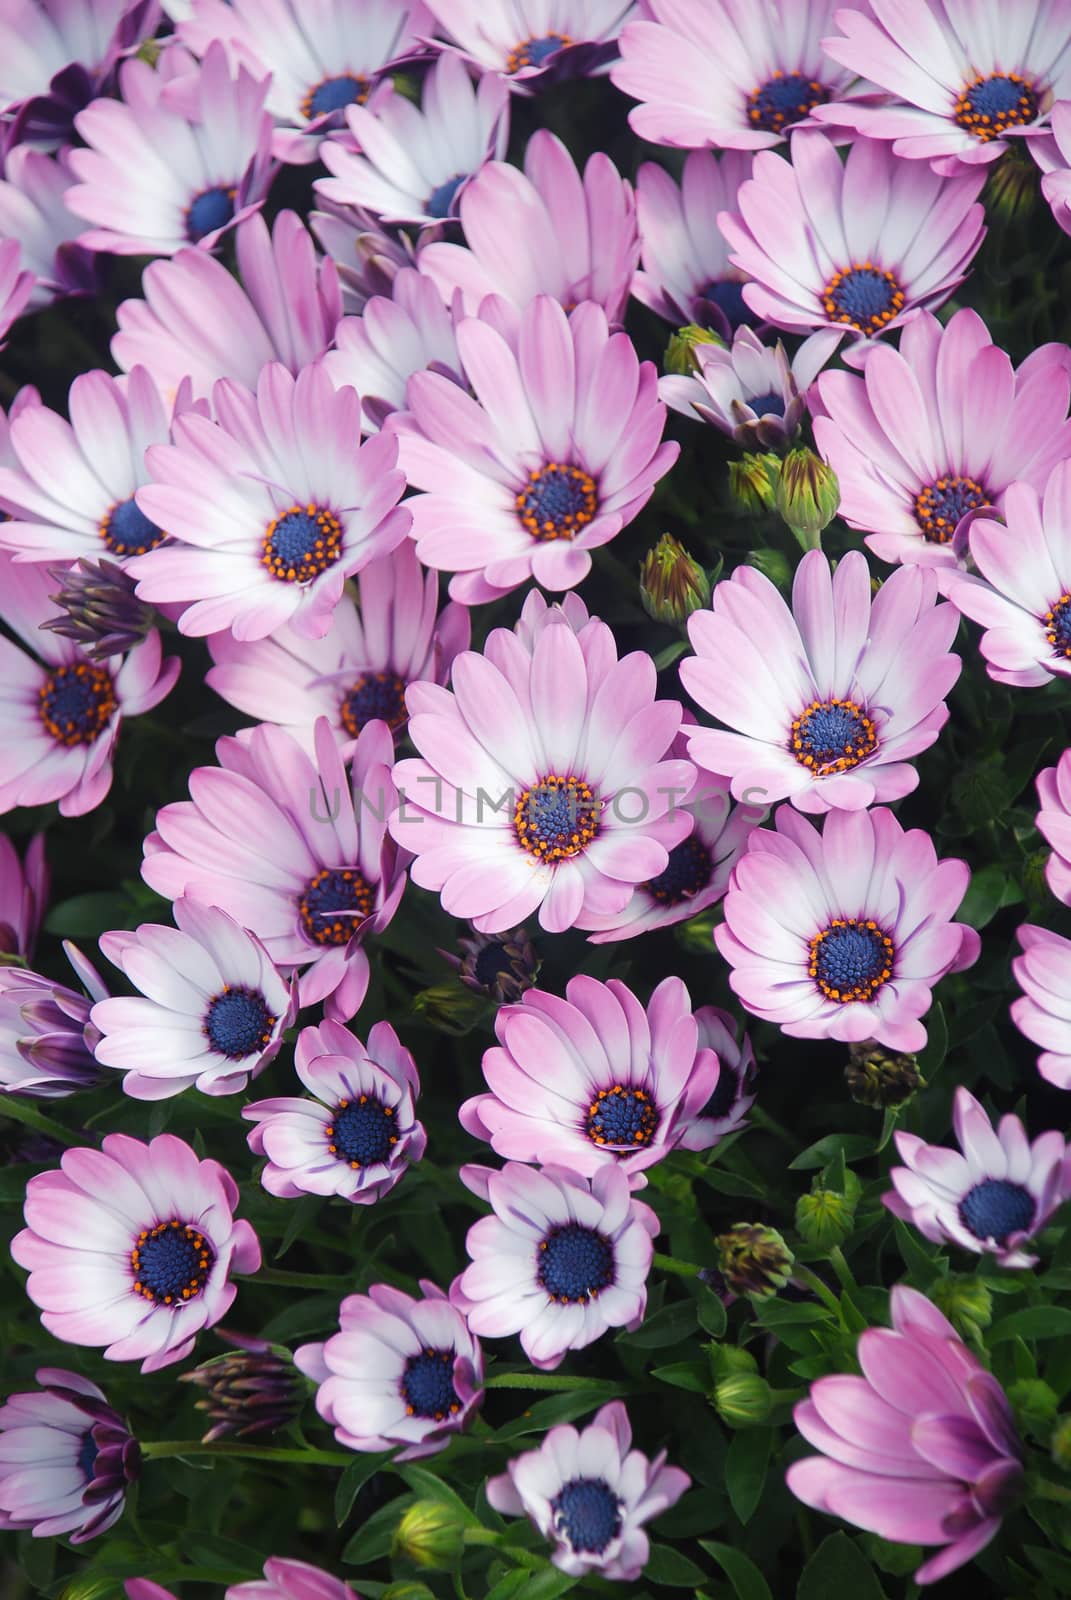 Light purple osteospermum or dimorphotheca flowers in the flower by yuiyuize